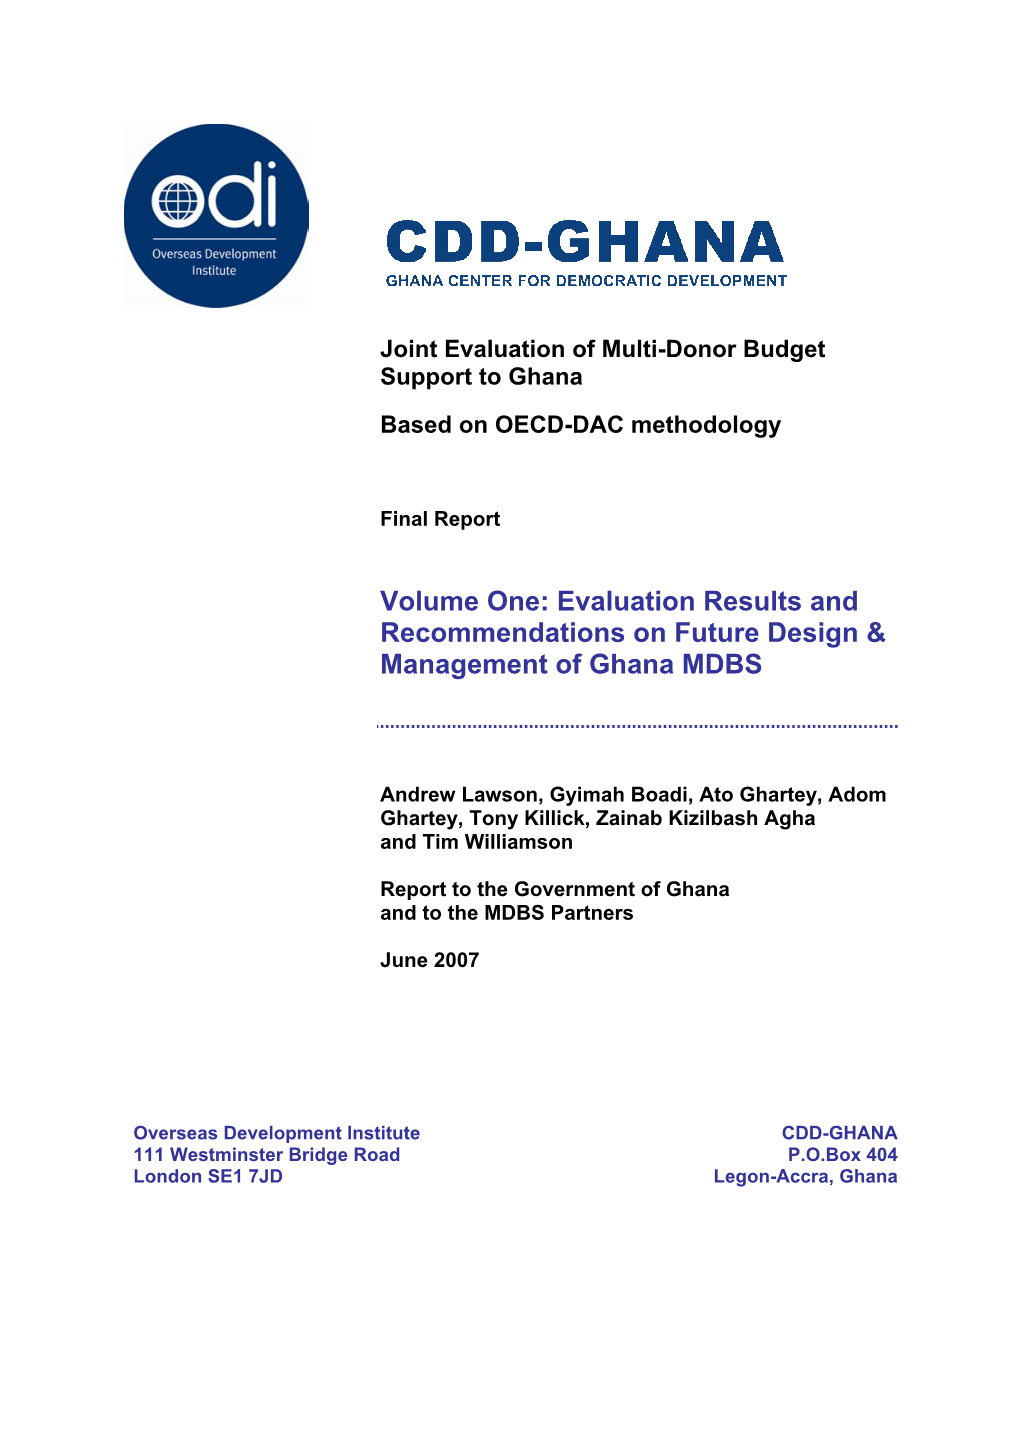 Joint Evaluation of Multi-Donor Budget Support to Ghana